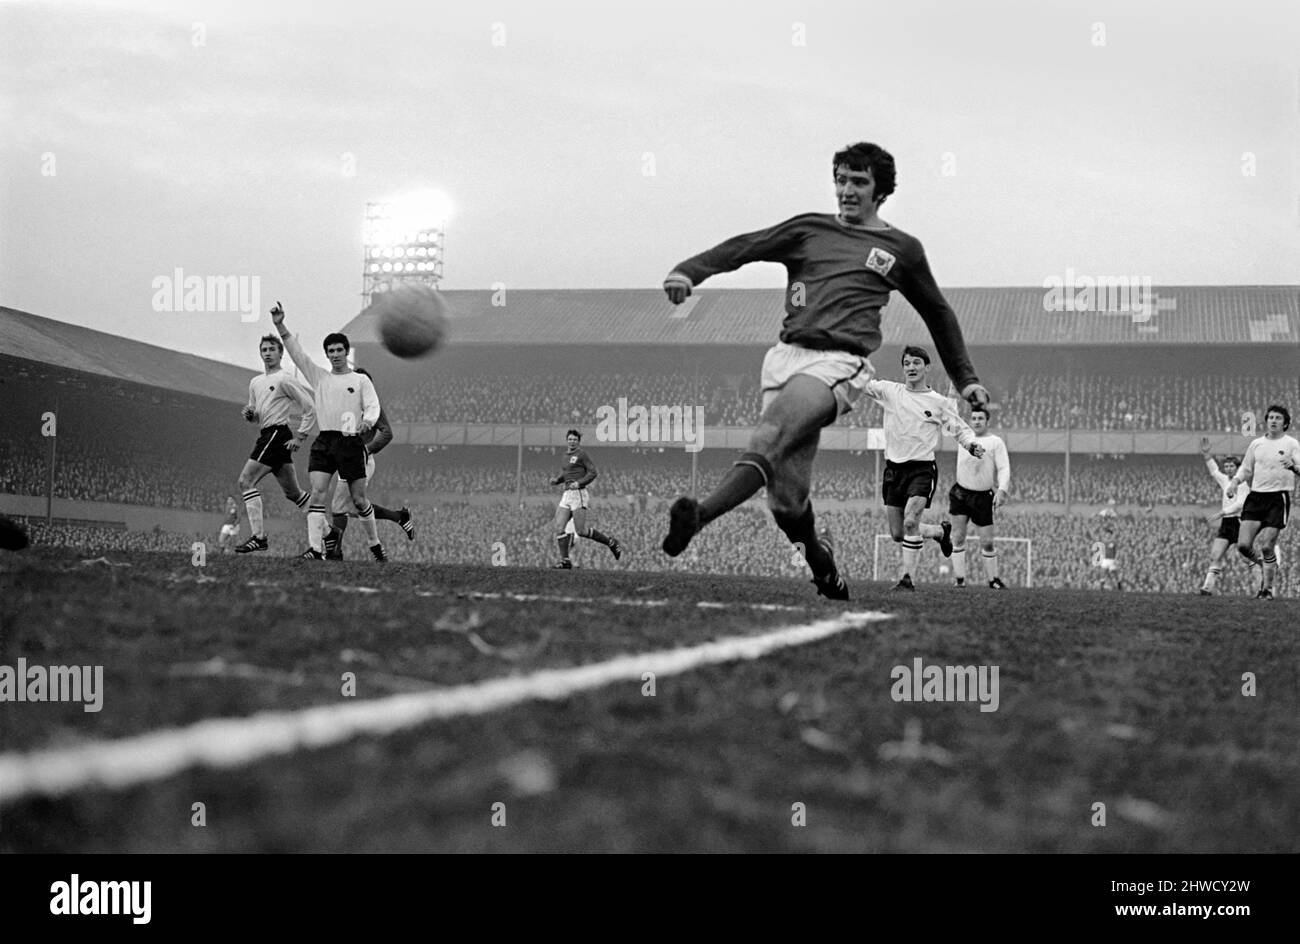 Derby v. Nottingham Forest. Action from the match. December 1969 Z11534-031 Stock Photo